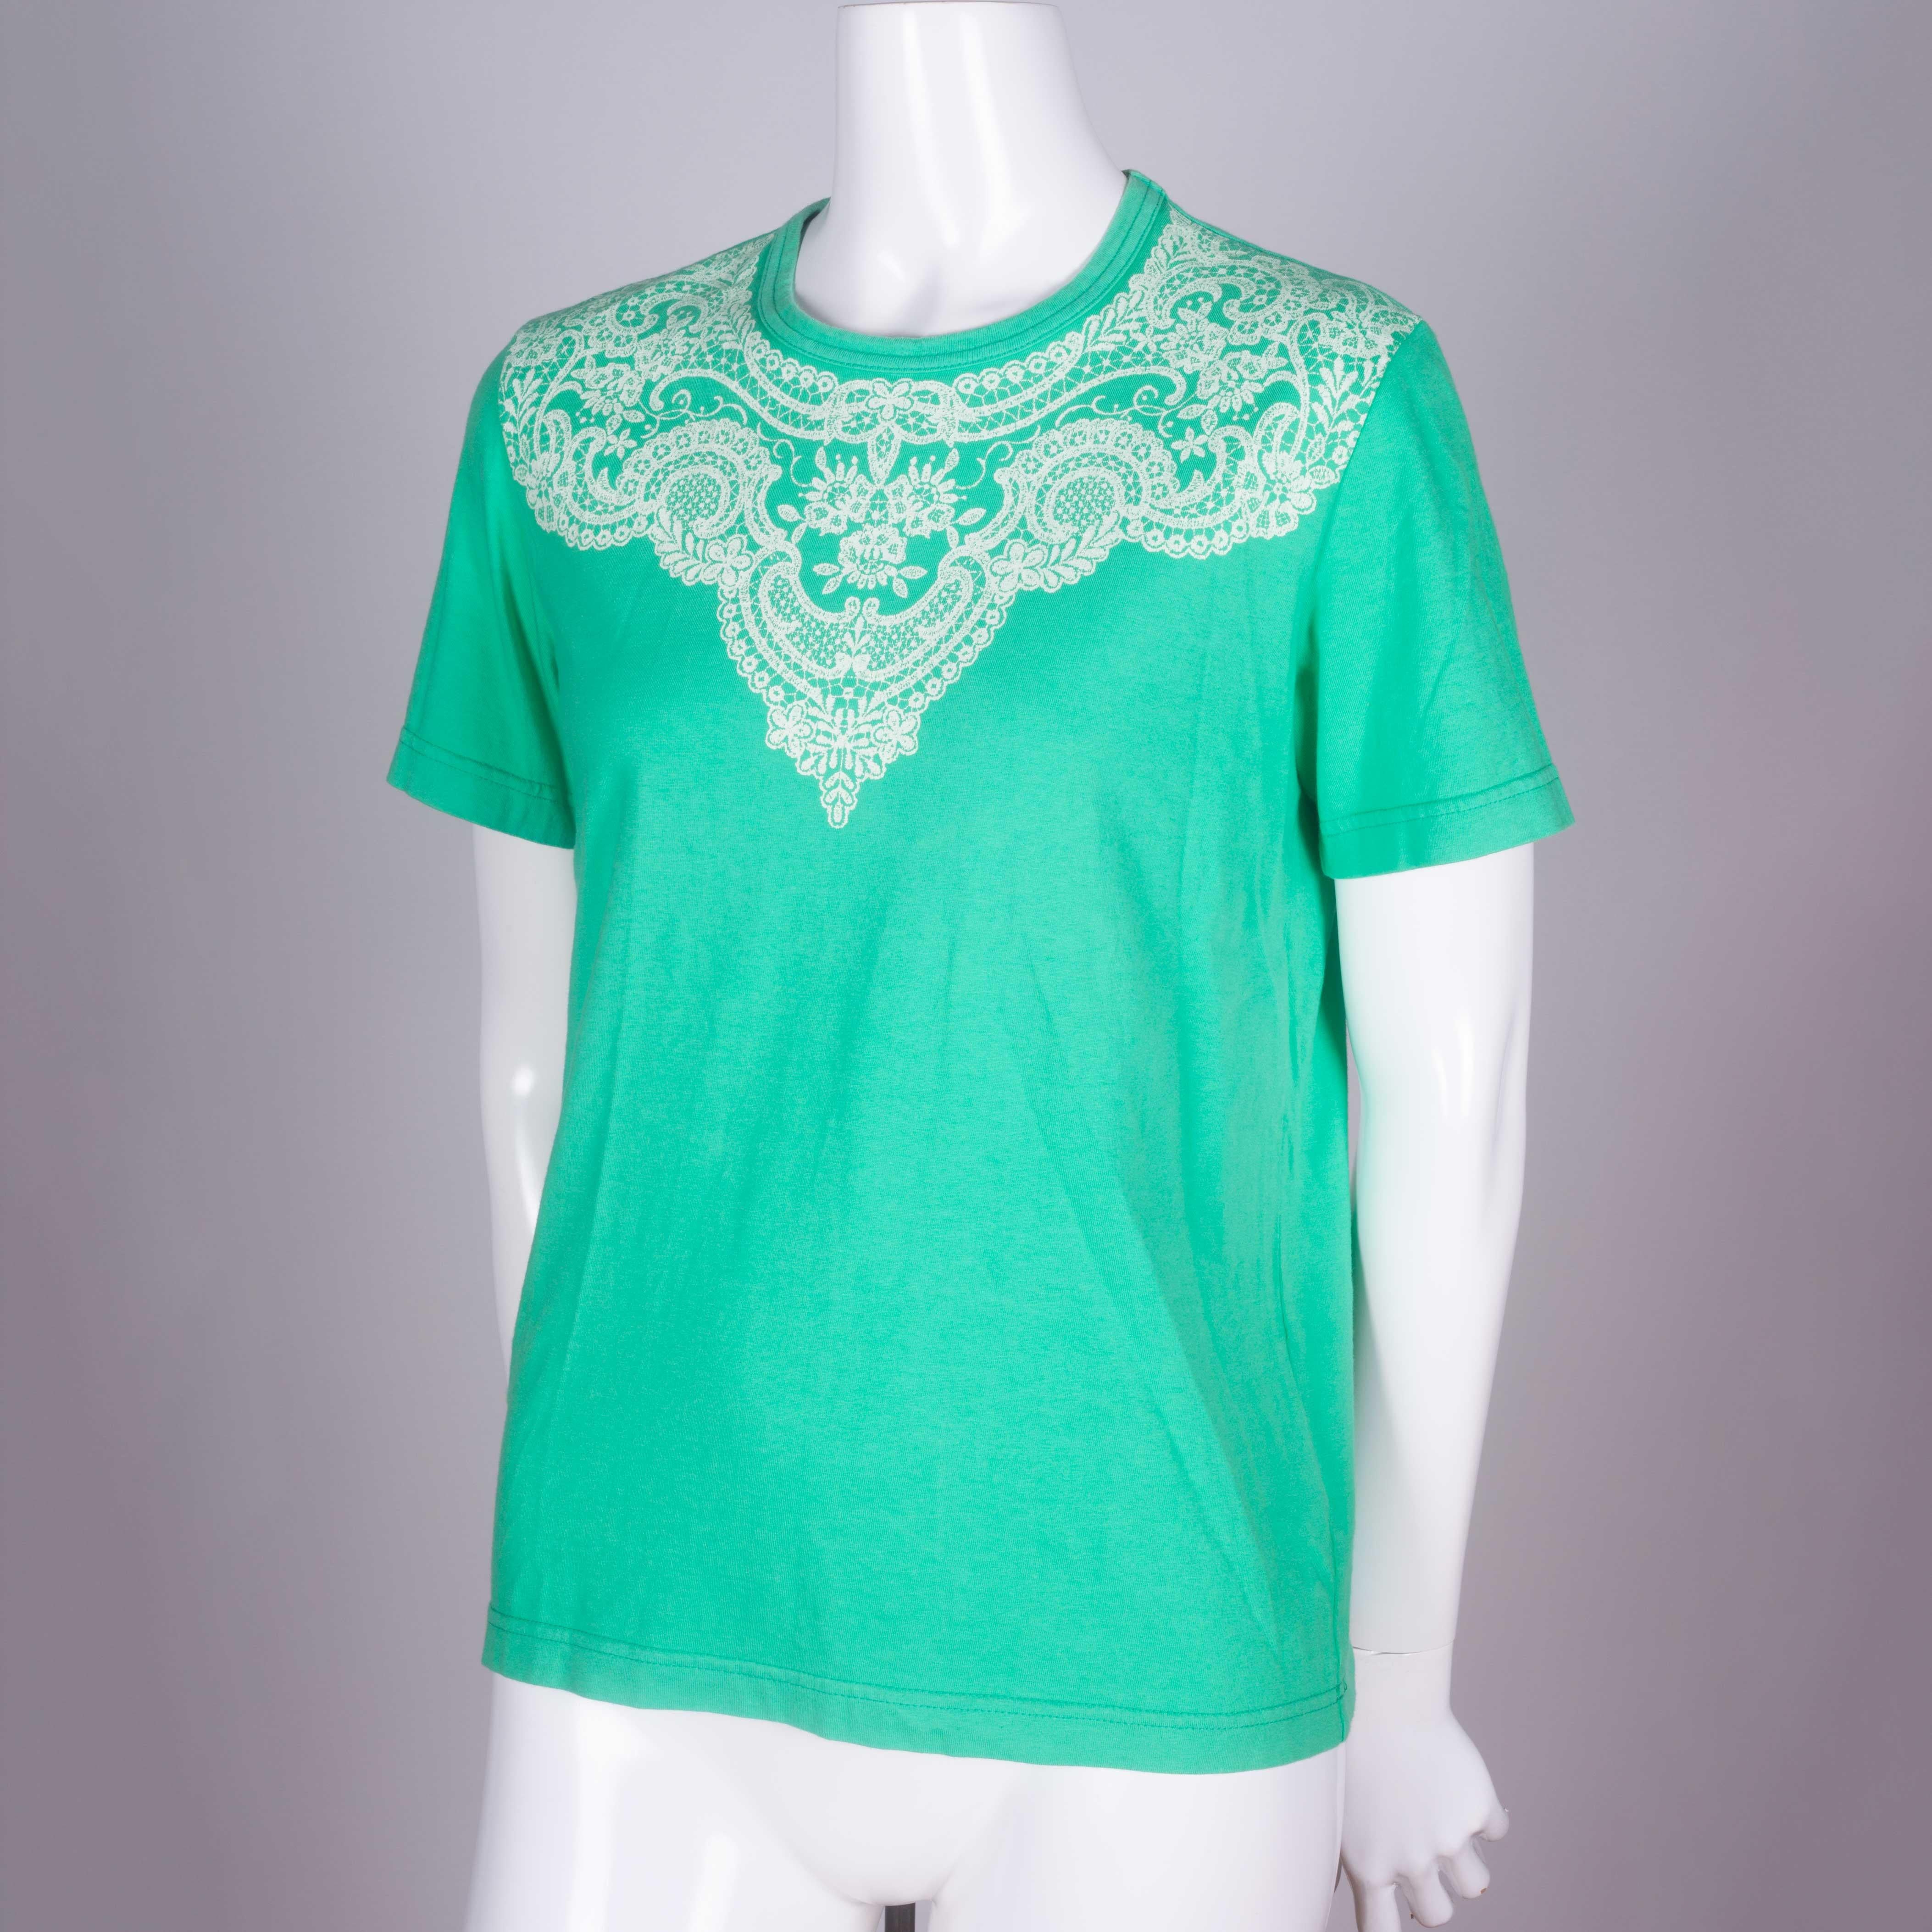 Comme des Garçons 2006 purple short sleeve t-shirt from Japan with lace motif around collar. Dainty lace screen print adds a soft organic embellishment to this casual, everyday tee in vibrant green eau de nil color. 

YEAR: 2006
MARKED SIZE: No size